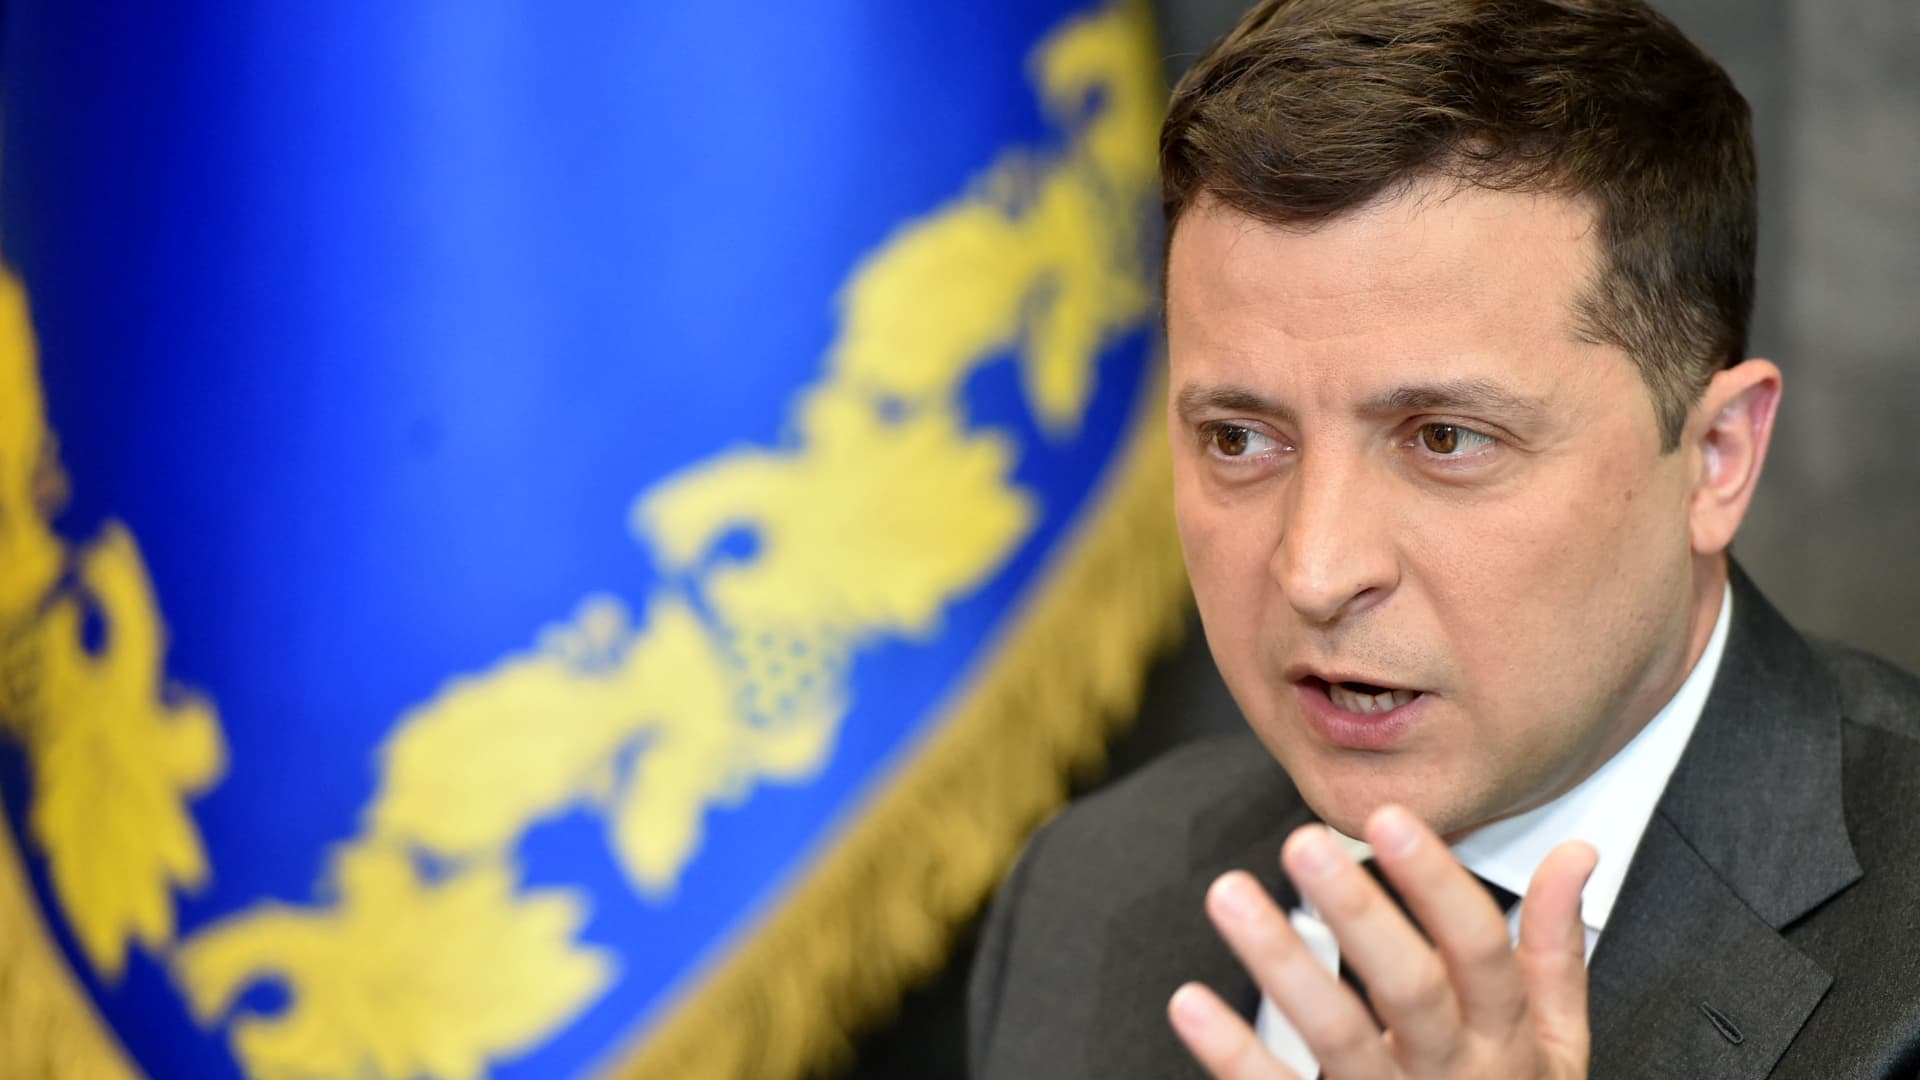 Ukrainian President Volodymyr Zelenskyy Zelenskyy enjoys high approval ratings among Ukrainians for rallying both the country's forces and public on a daily basis.